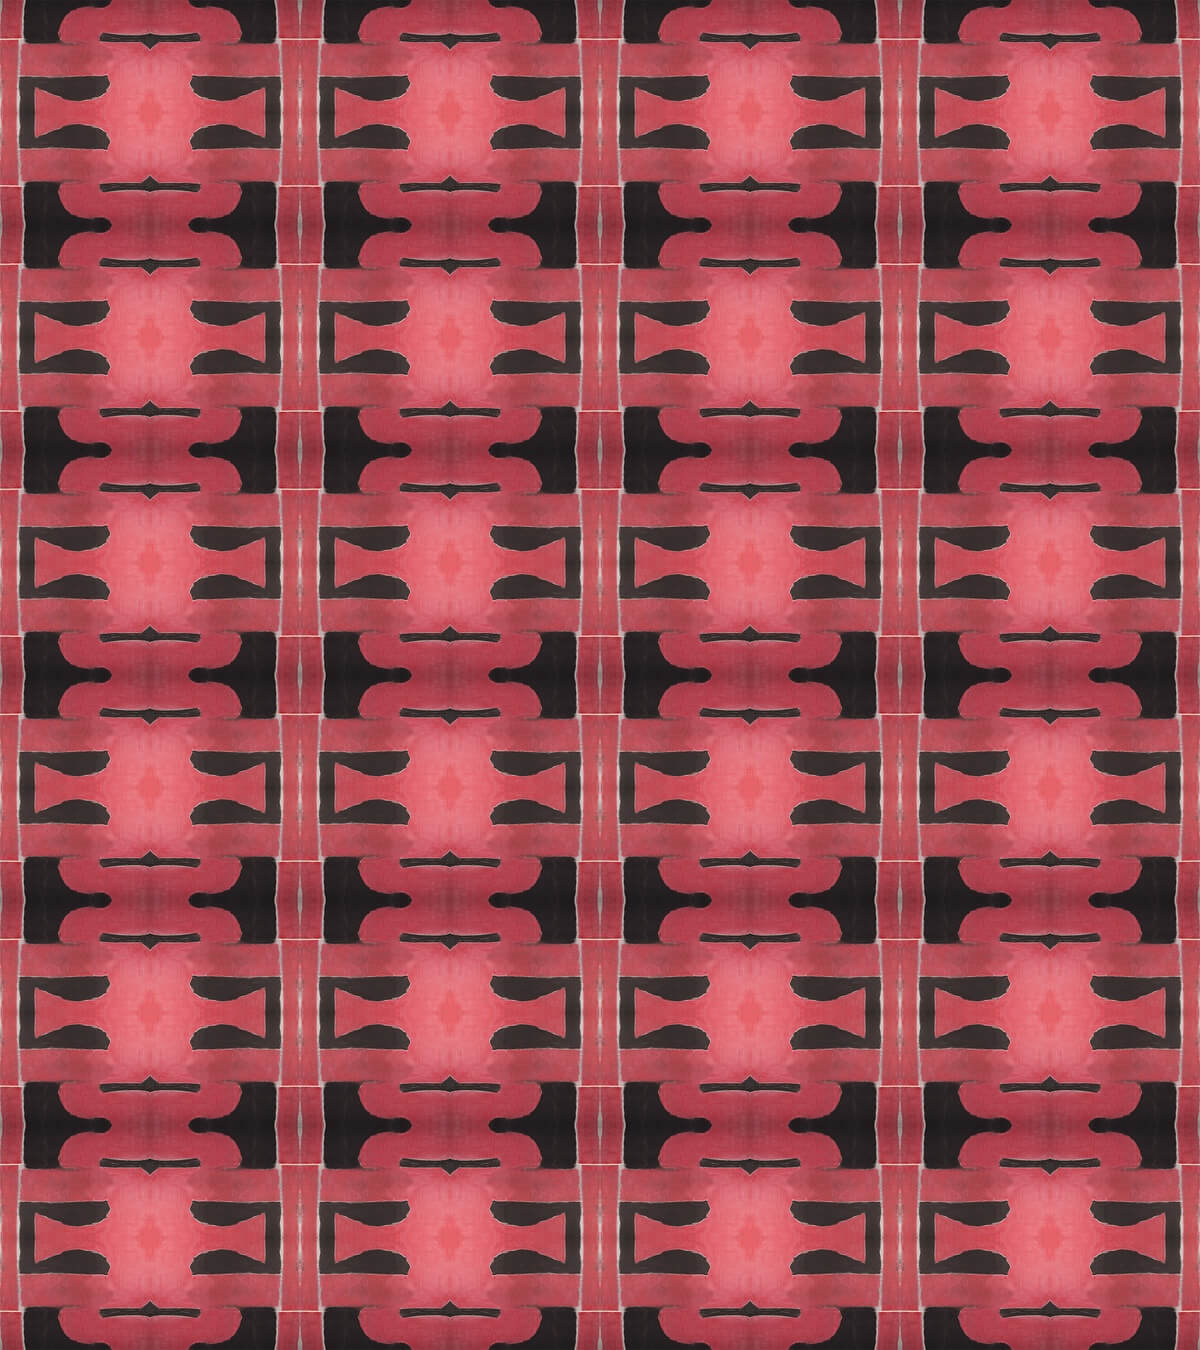 Beyond pattern in red/pink and black